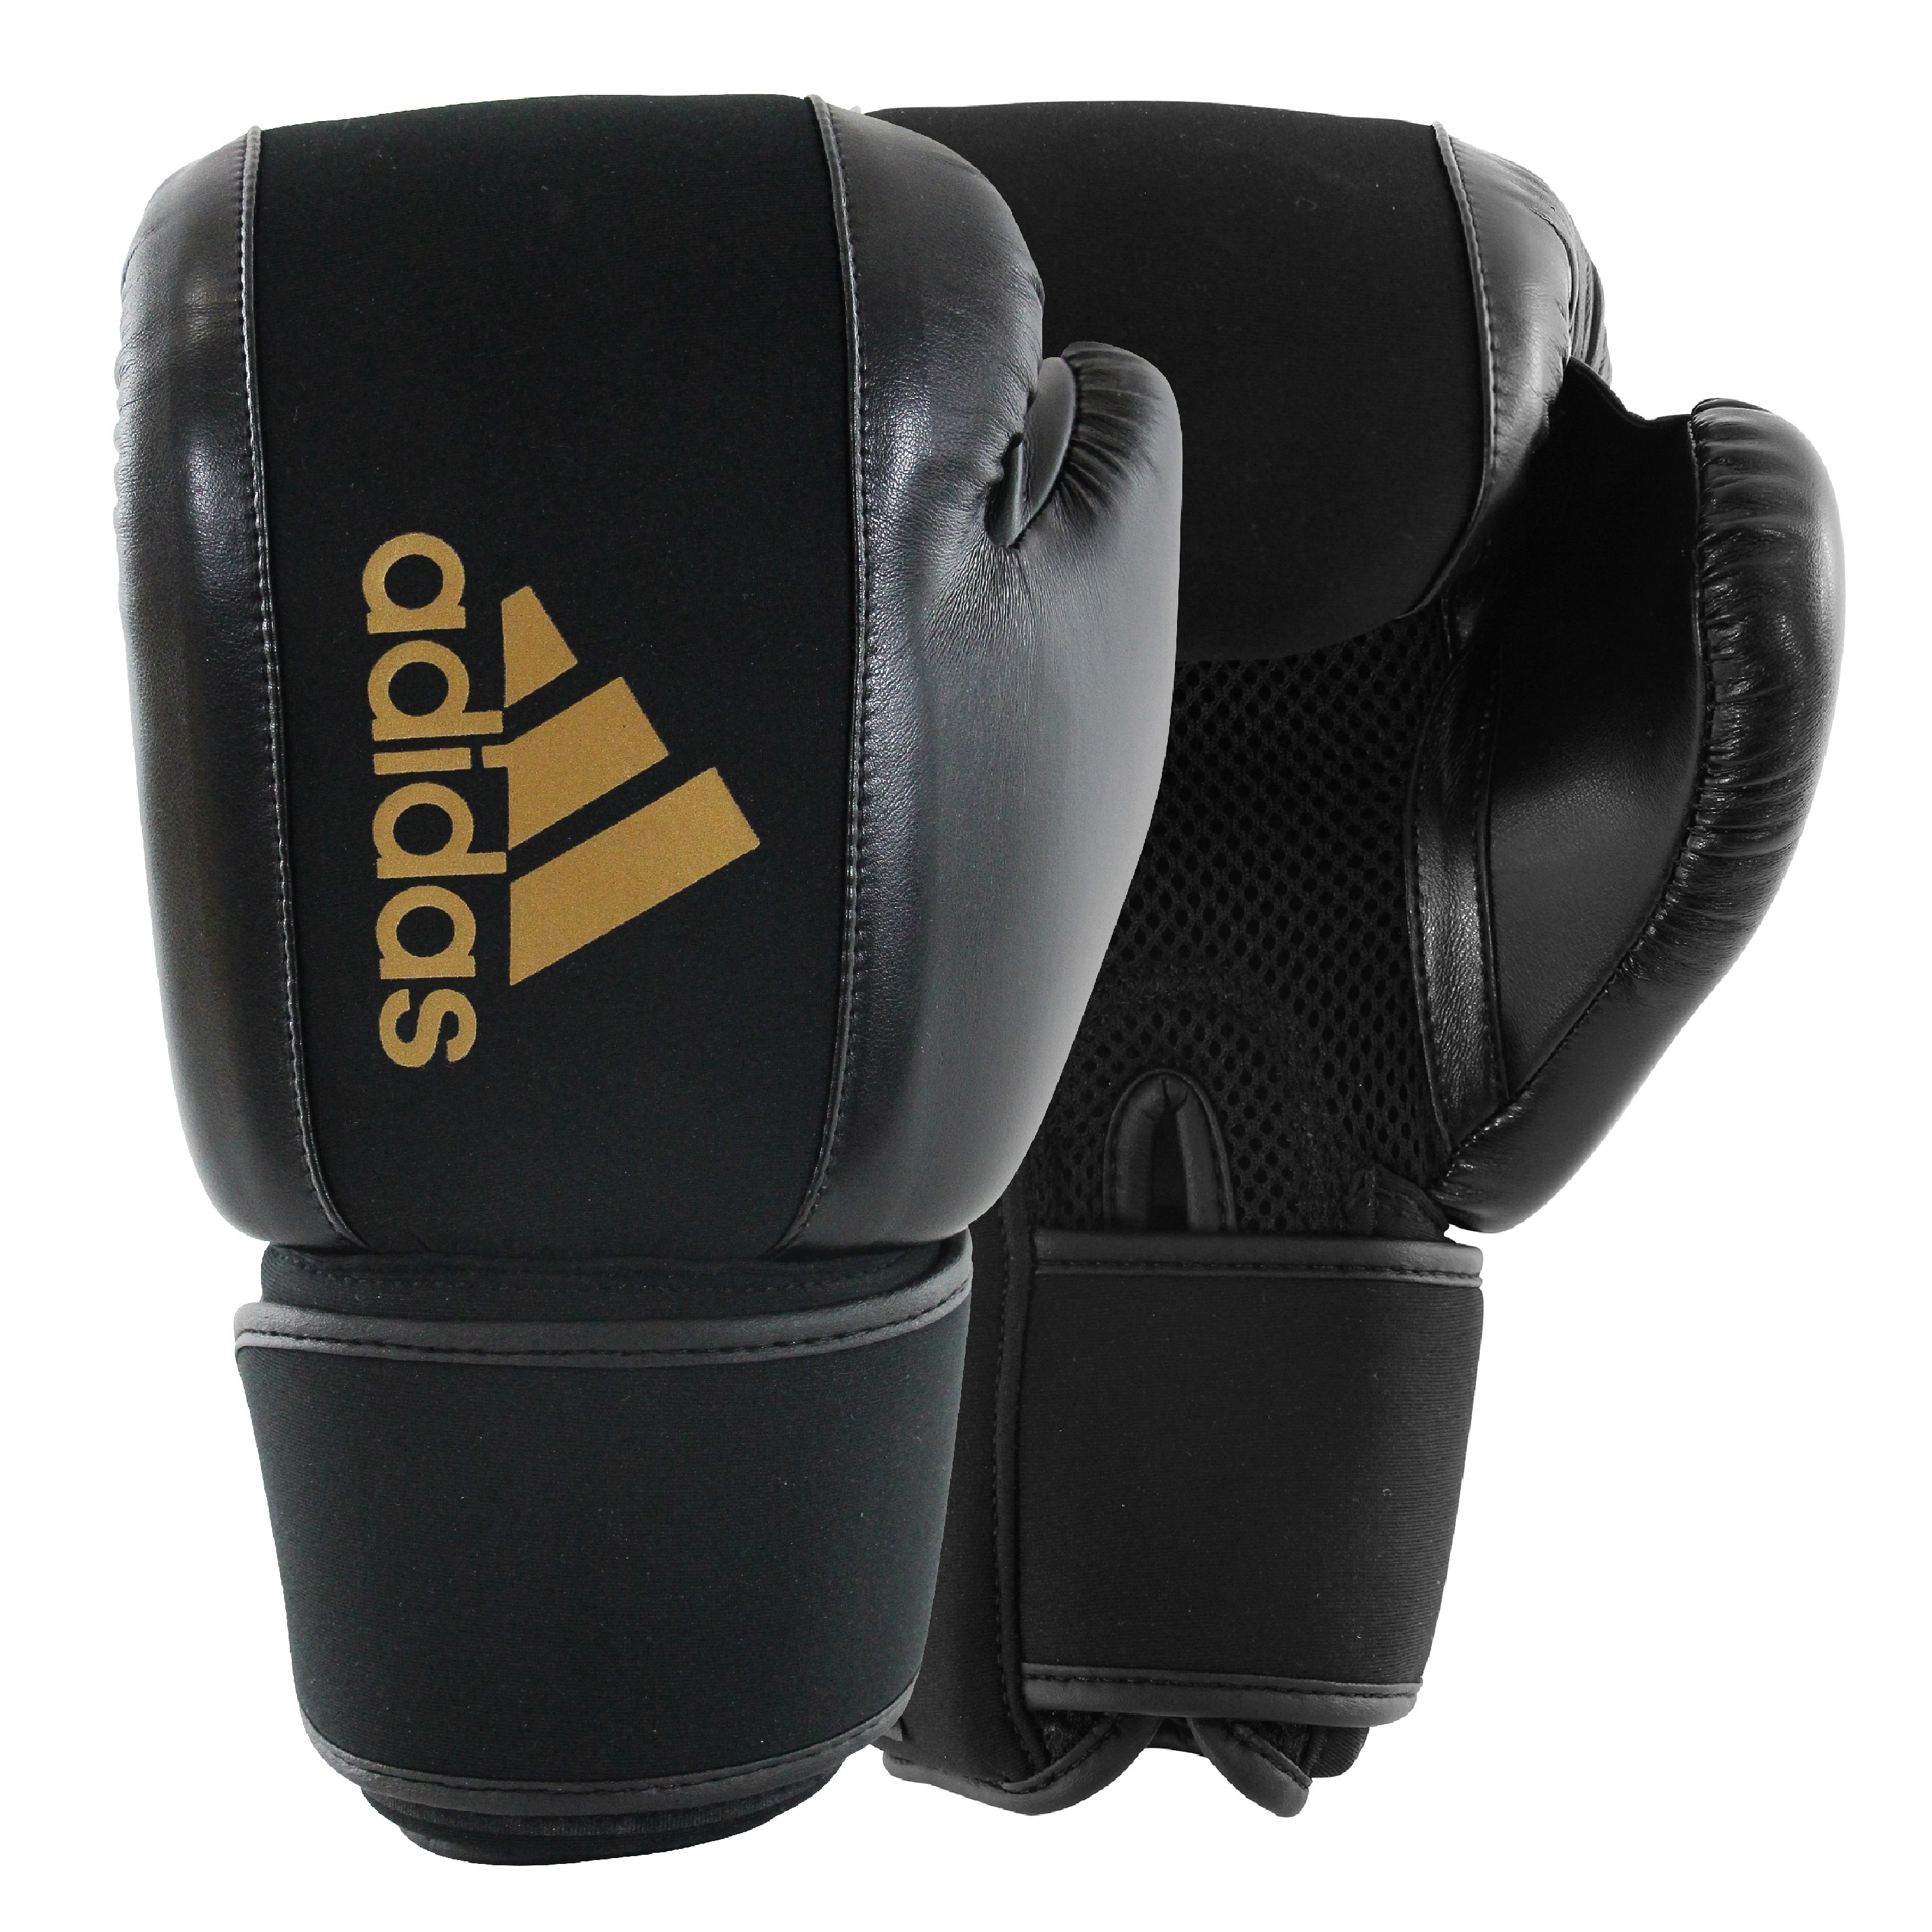 Bed Boxing - Gloves adidas 29065439 Washable & Beyond Bath -